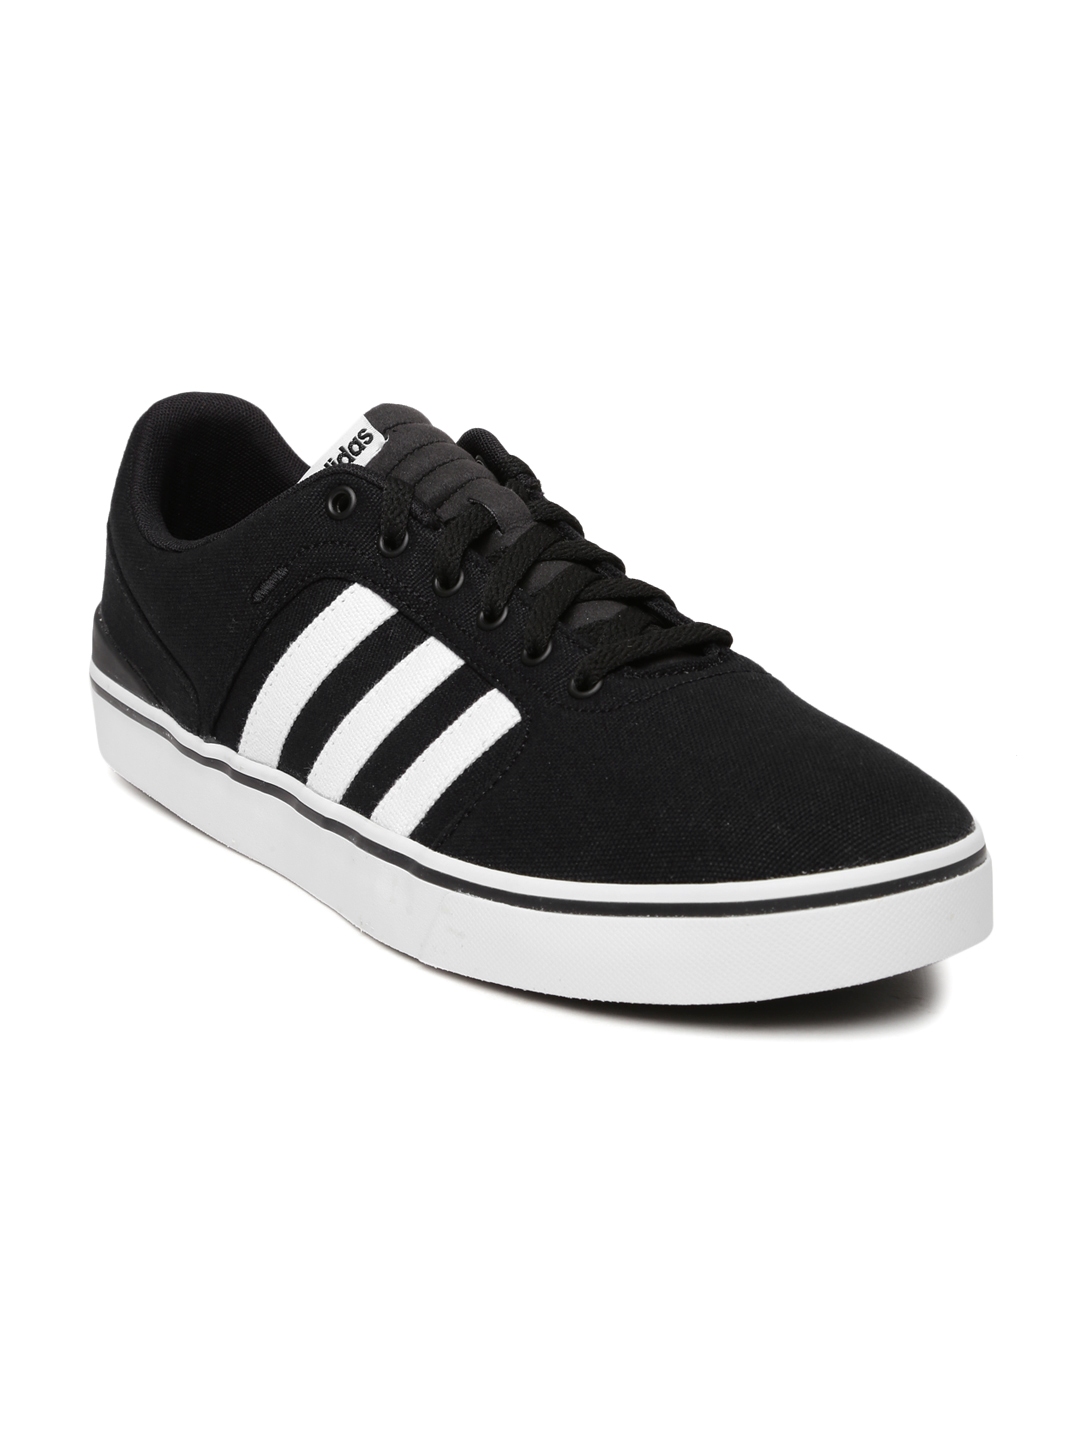 adidas casual neo shoes